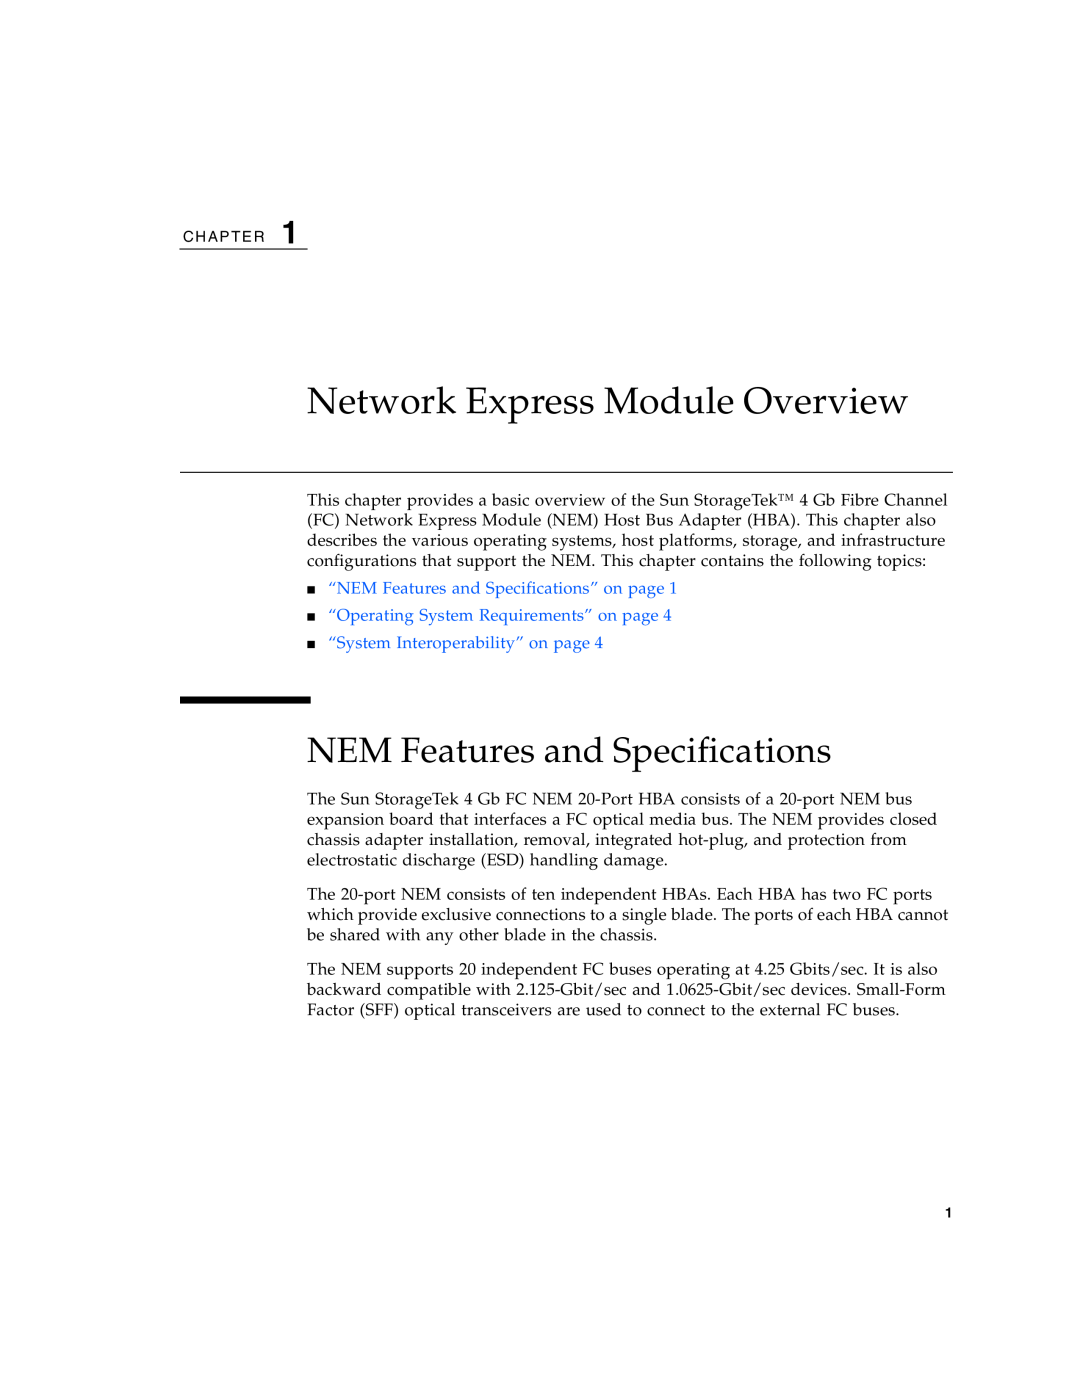 Sun Microsystems 2.0 Network Express Module Overview, NEM Features and Specifications, “System Interoperability” on page 